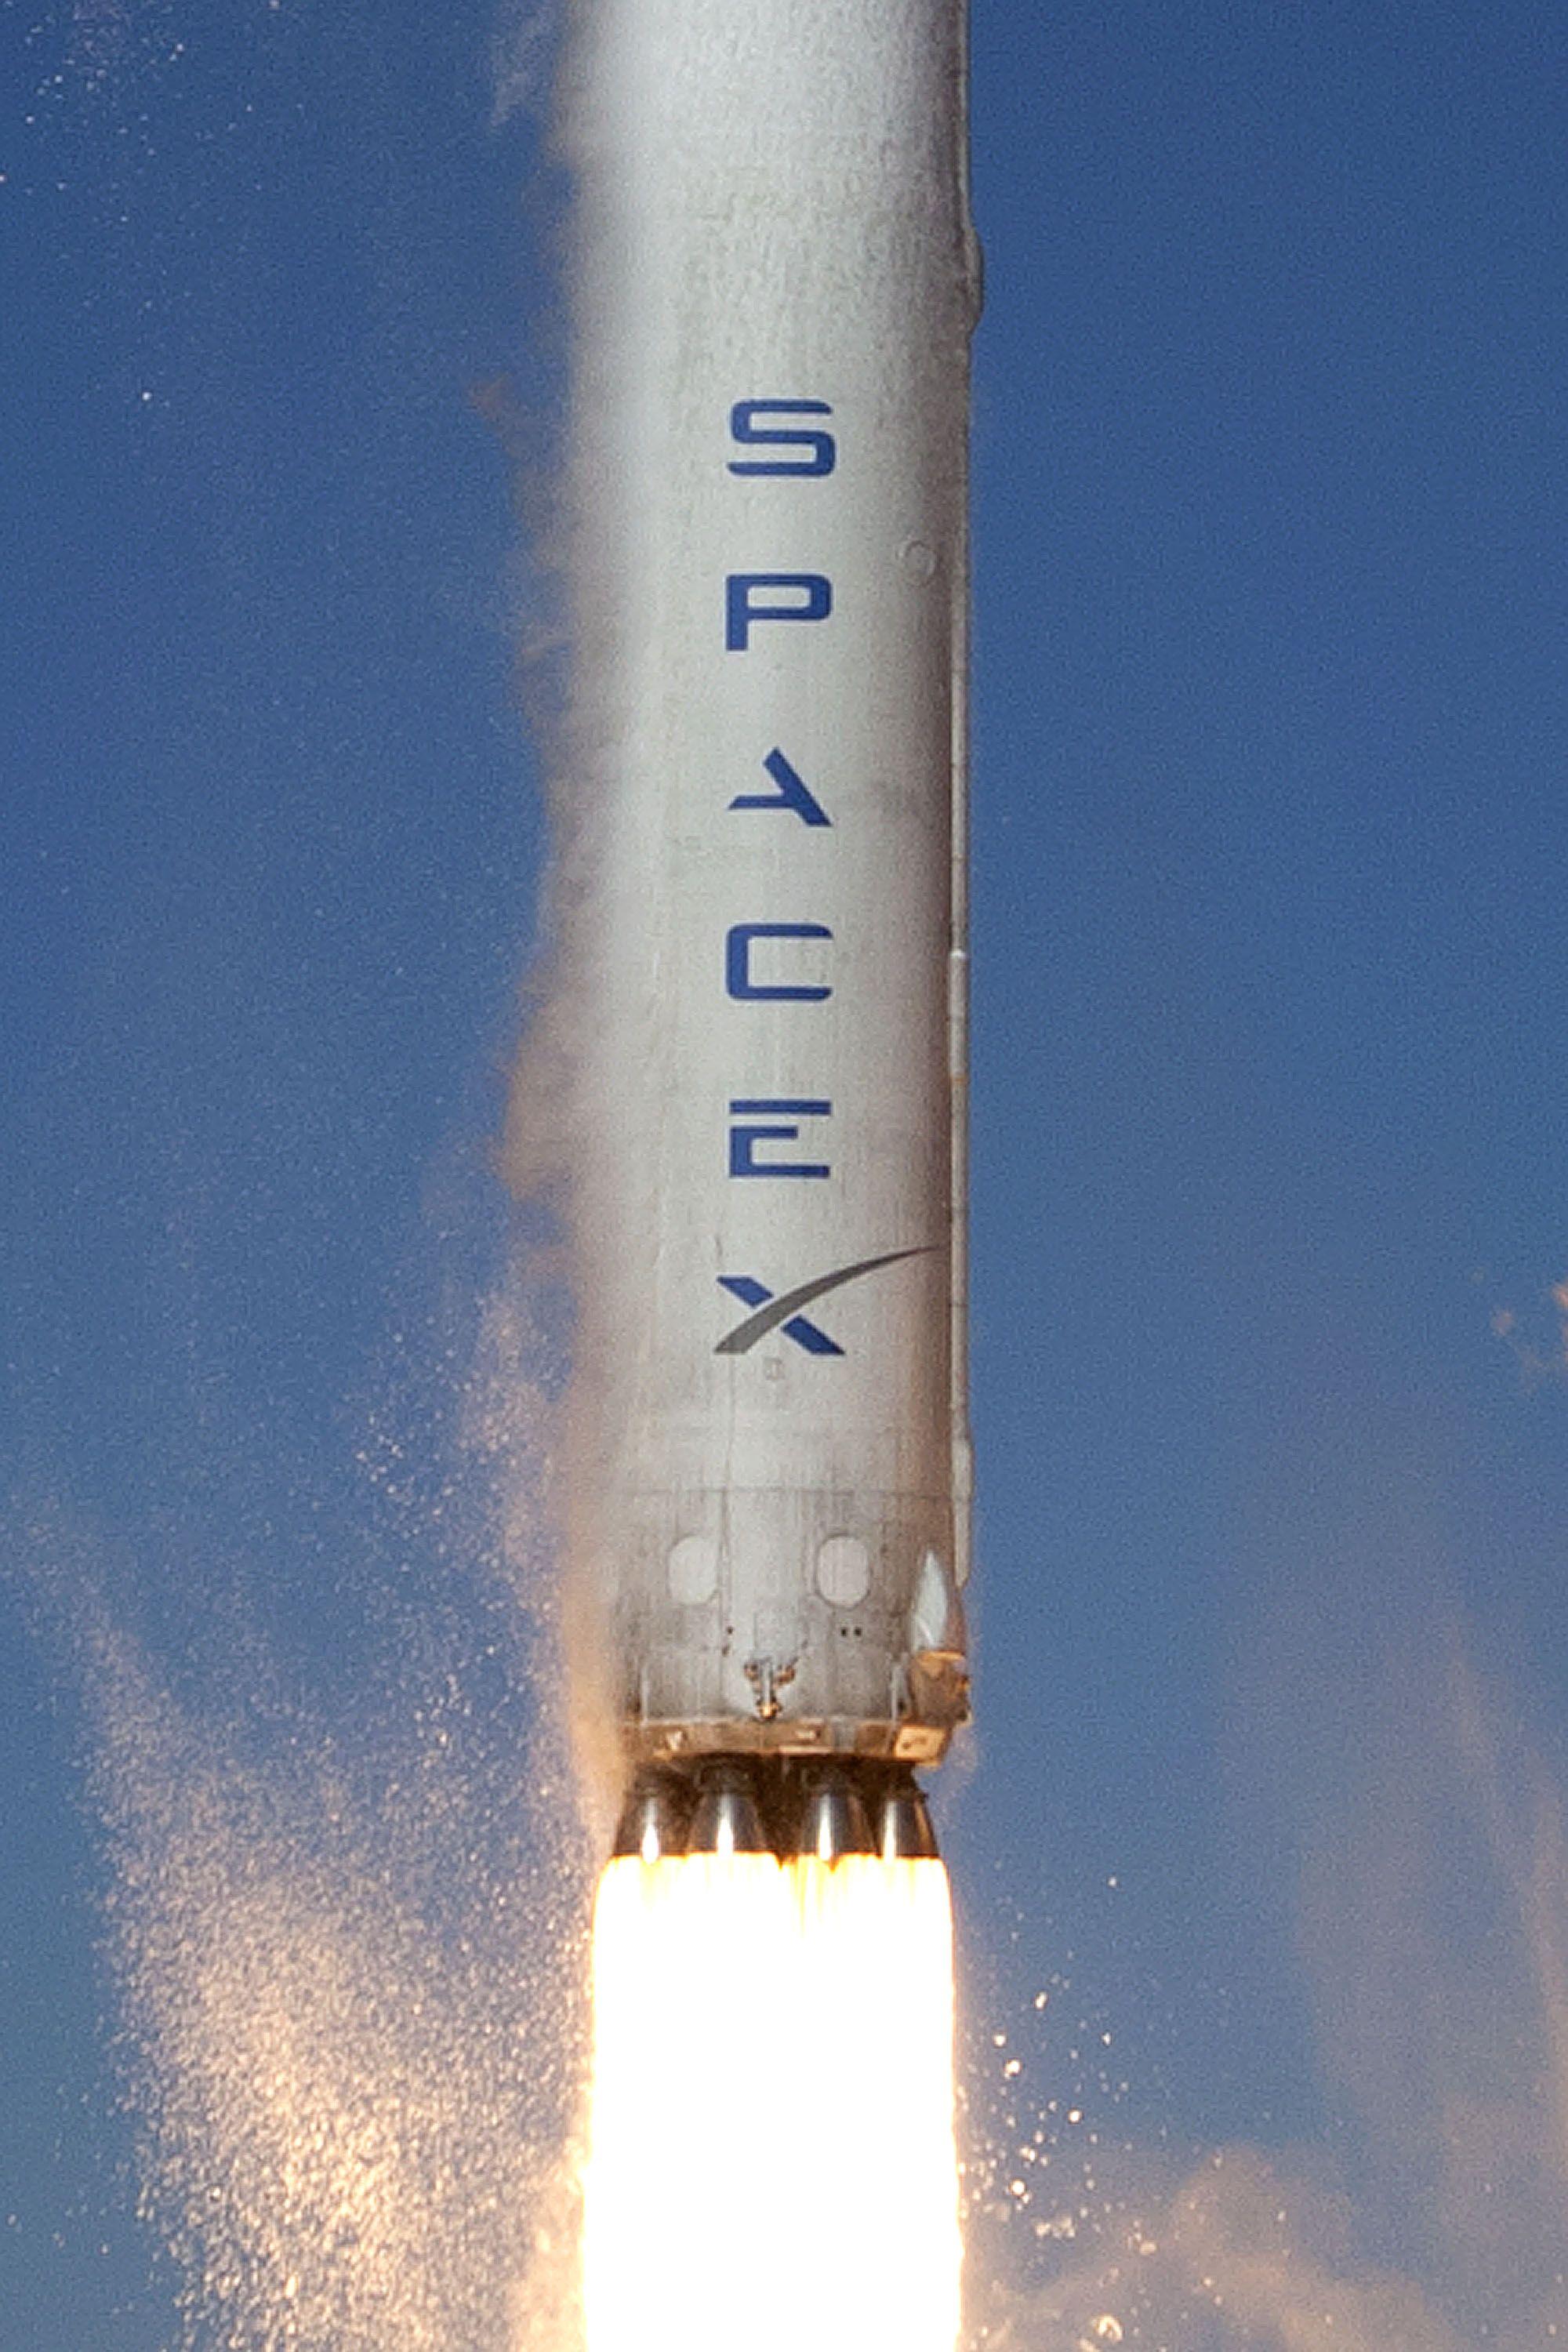 SpaceX Mars Rocket Logo - SpaceX Is Staying Busy